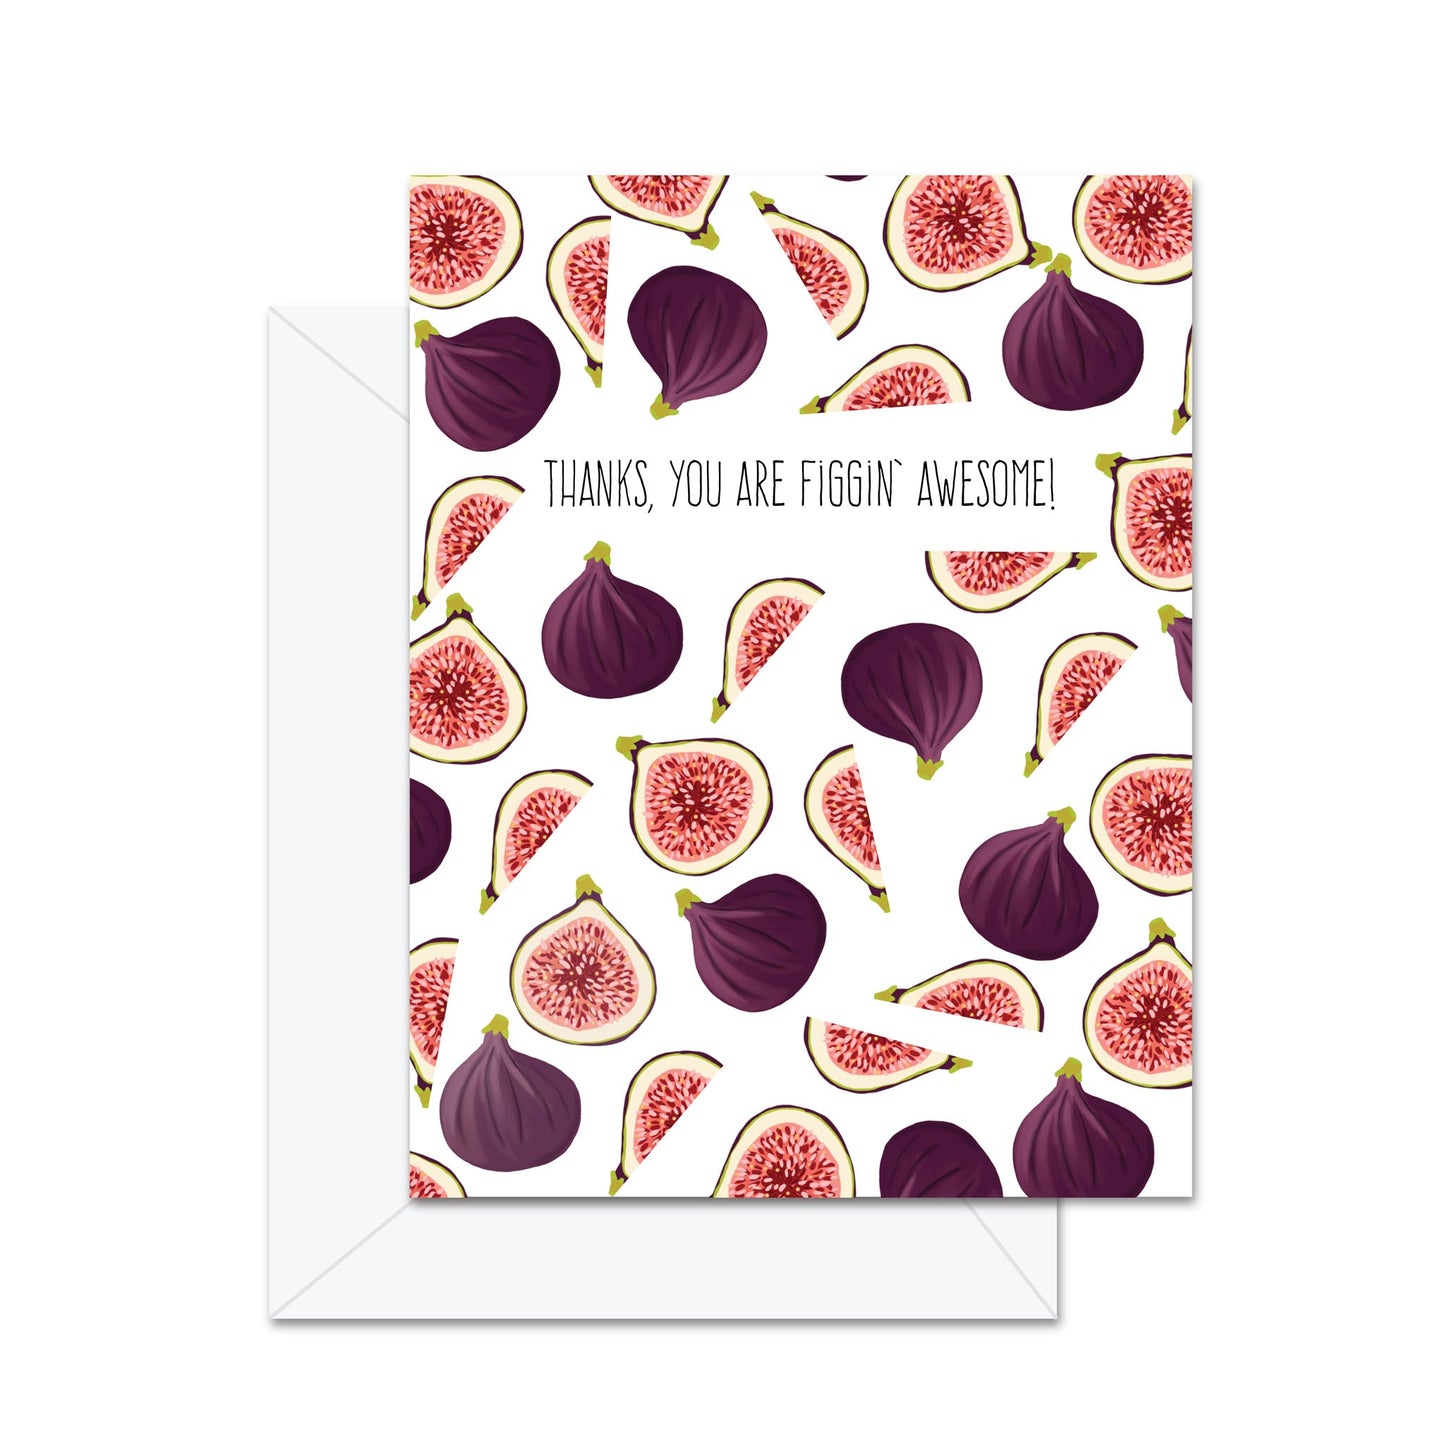 Thanks You Are Figgin' Awesome! - Greeting Card